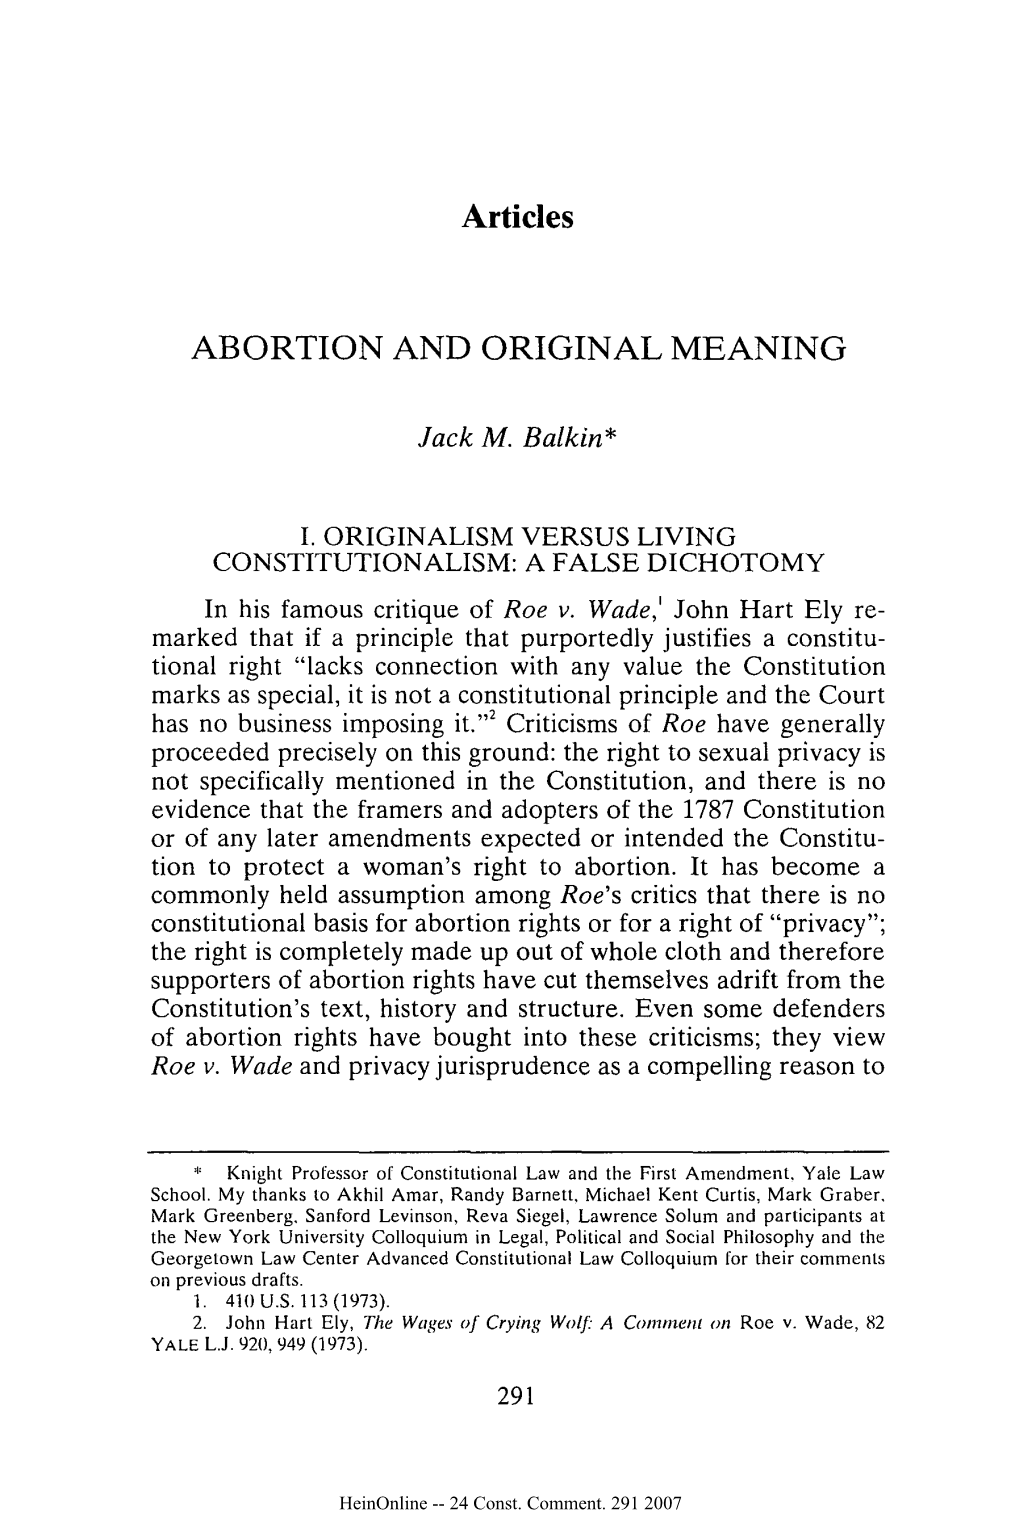 Articles ABORTION and ORIGINAL MEANING